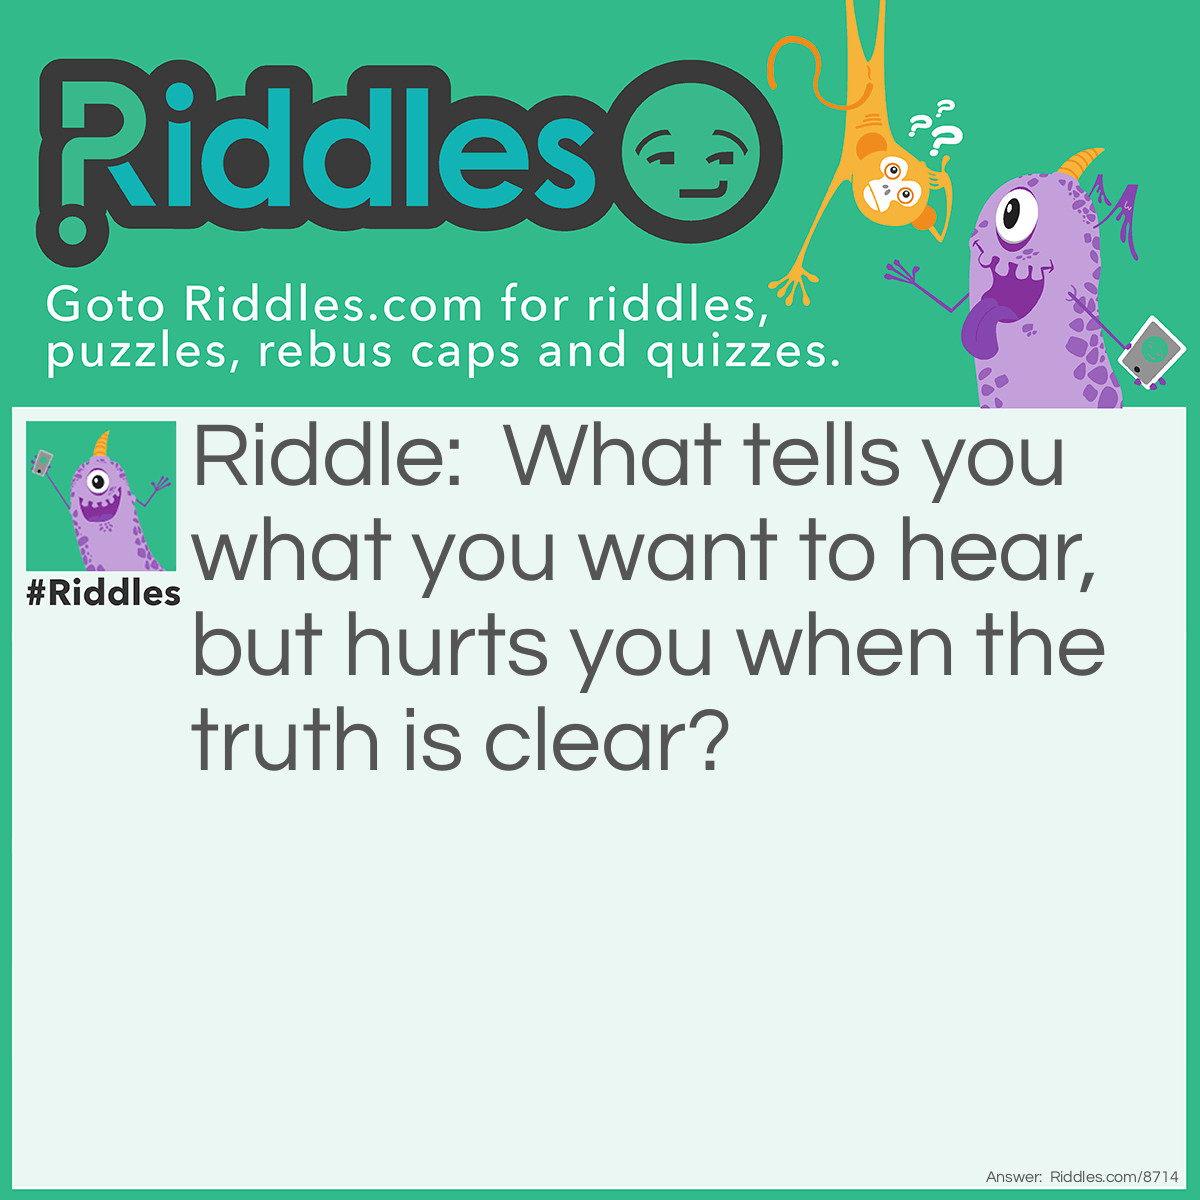 Riddle: What tells you what you want to hear, but hurts you when the truth is clear? Answer: A liar.